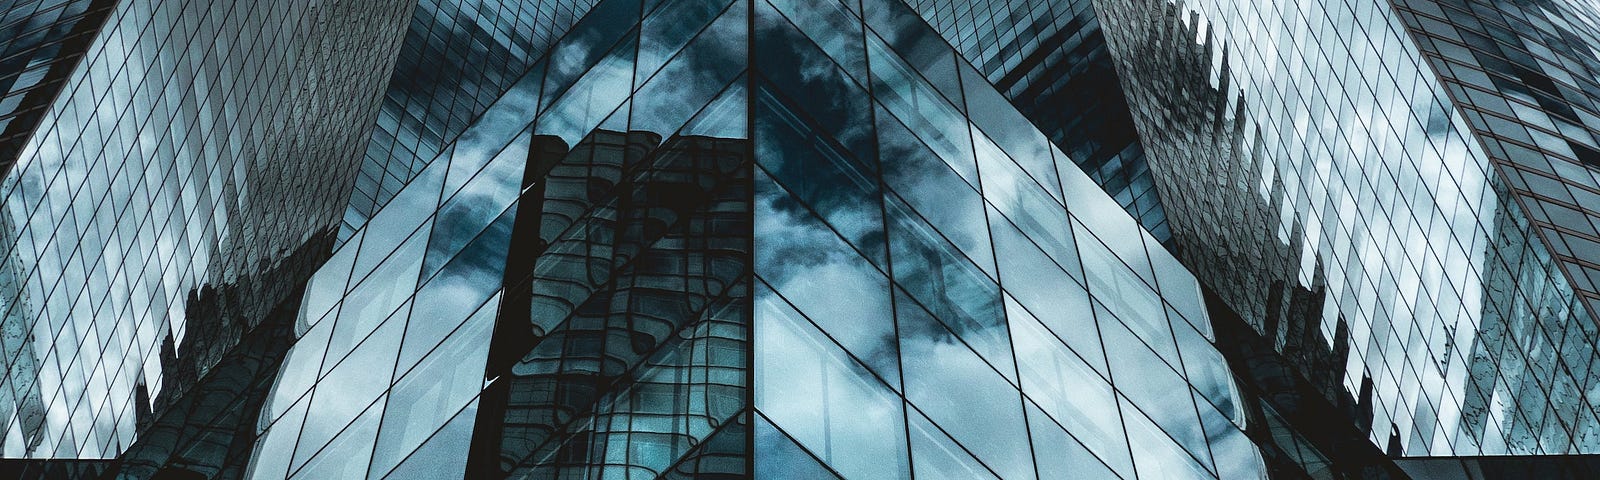 Image of tall glass office buildings with wall-to-wall windows that reflect blue sky and clouds, from the perspective of the ground looking up.